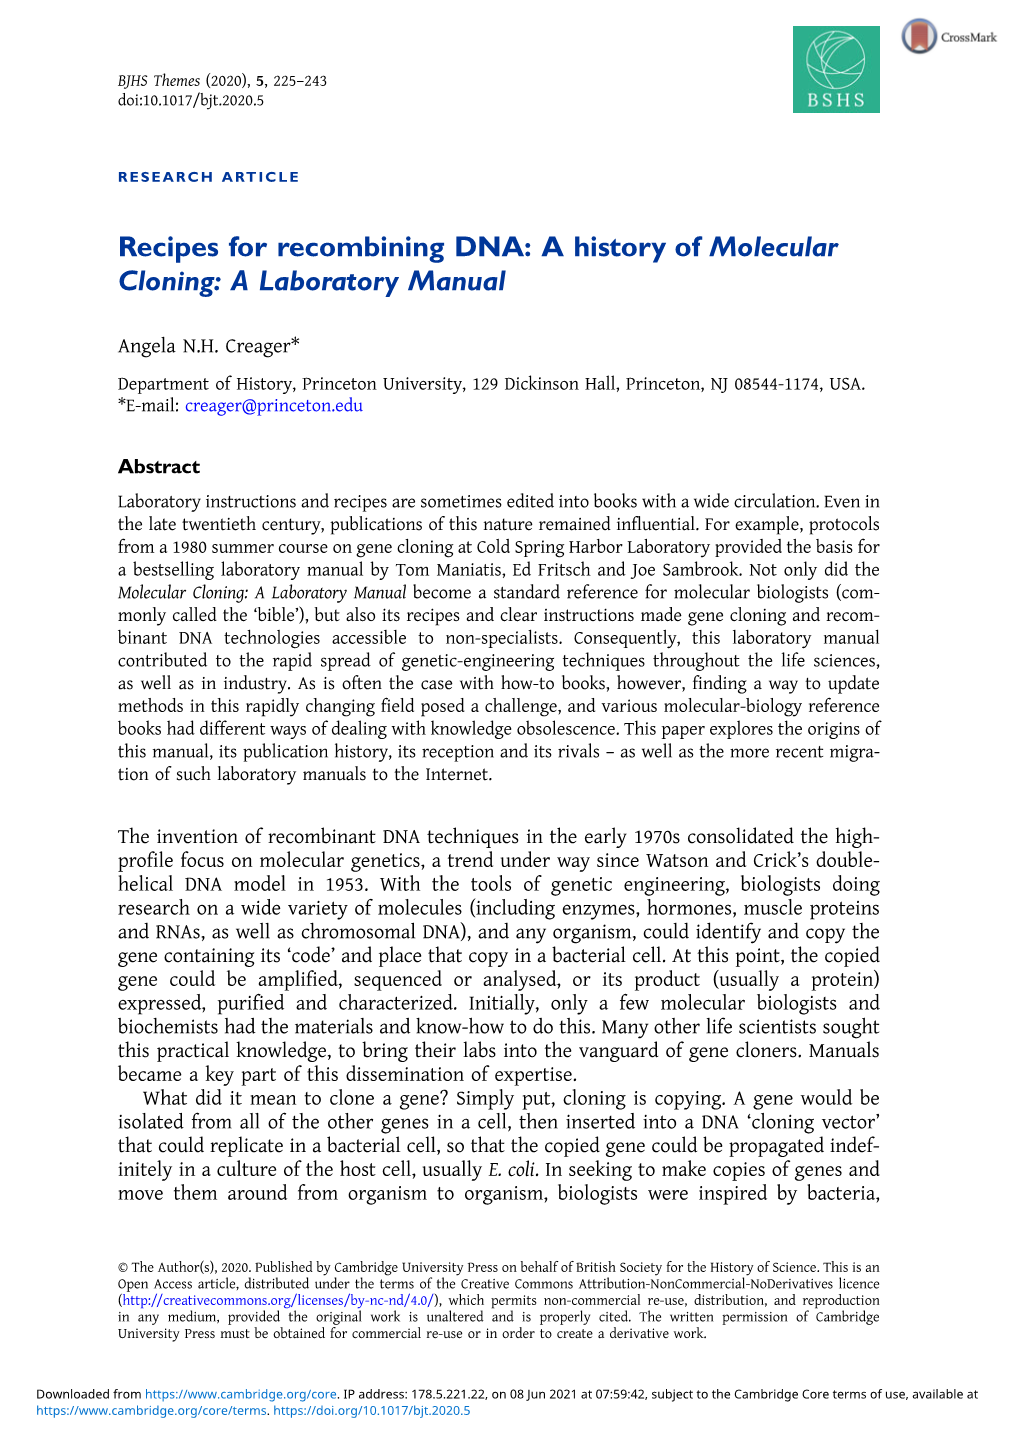 Recipes for Recombining DNA: a History of Molecular Cloning: a Laboratory Manual